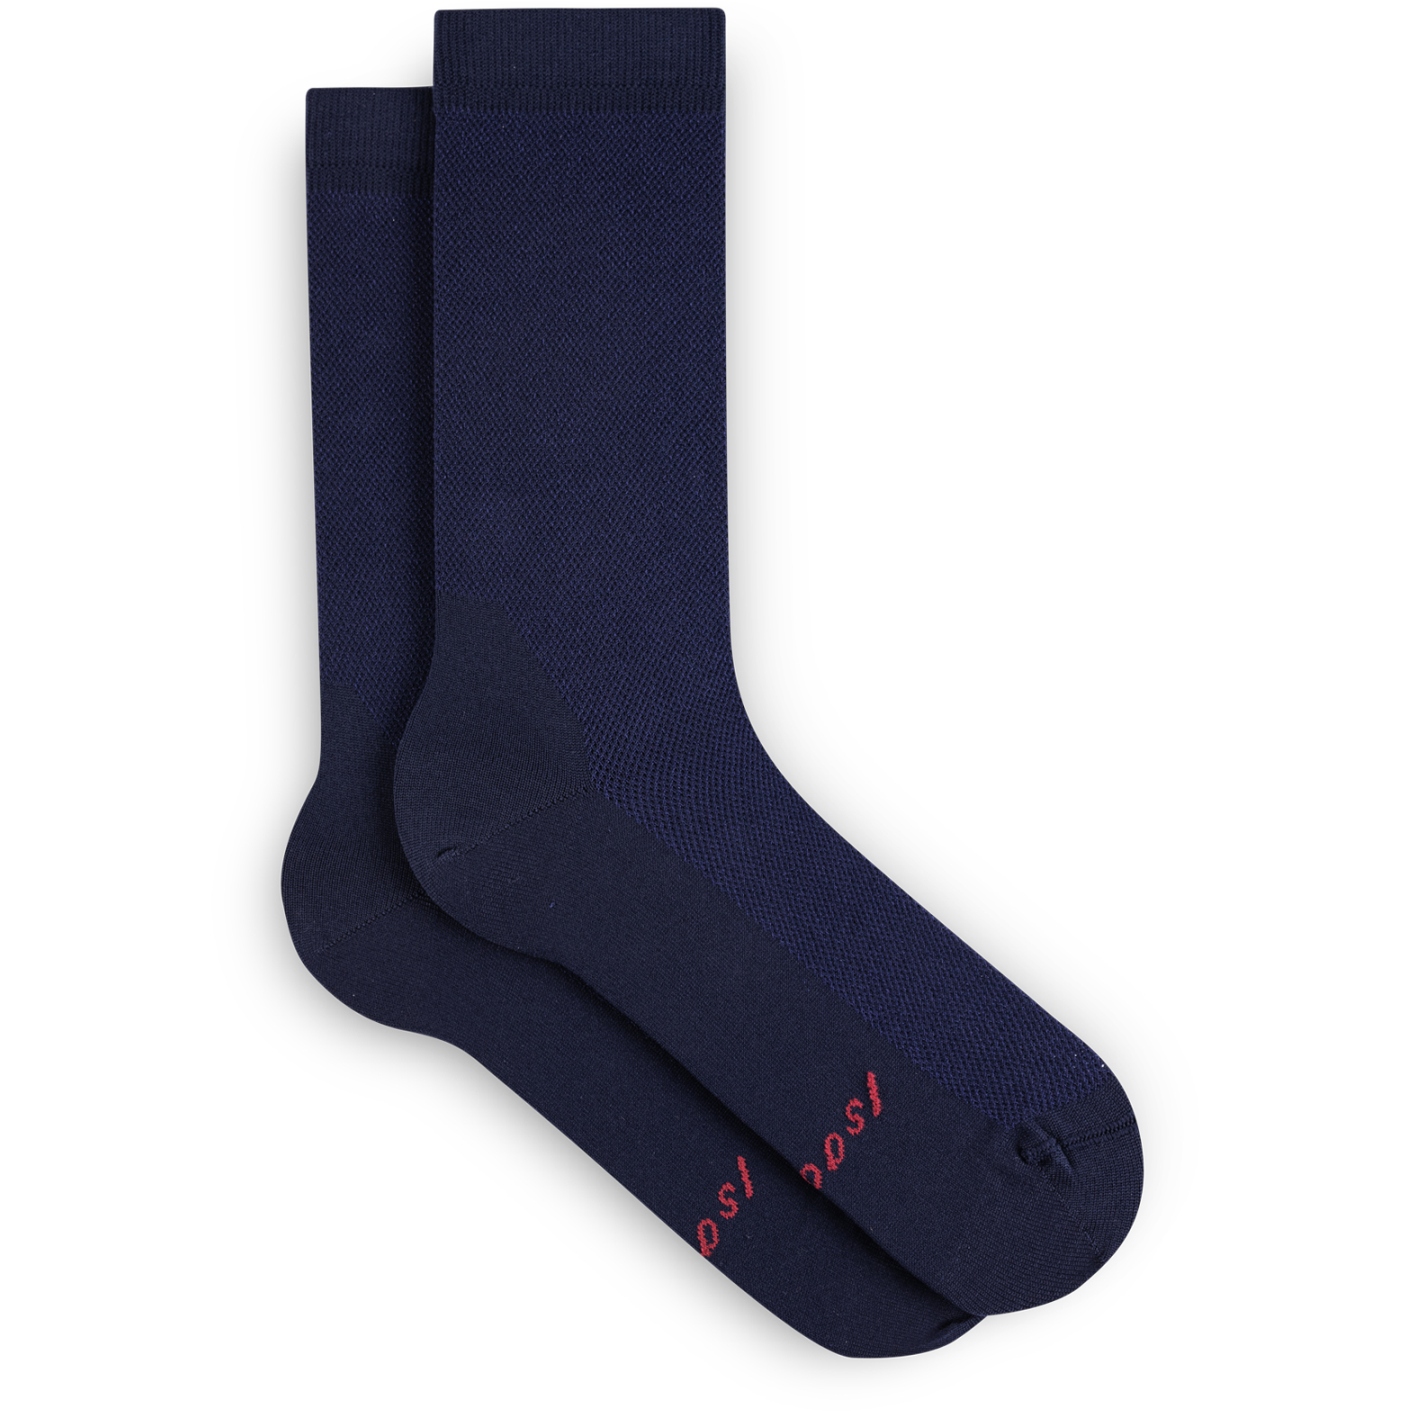 Picture of Isadore Signature Climbers Light Socks - Dress Blues